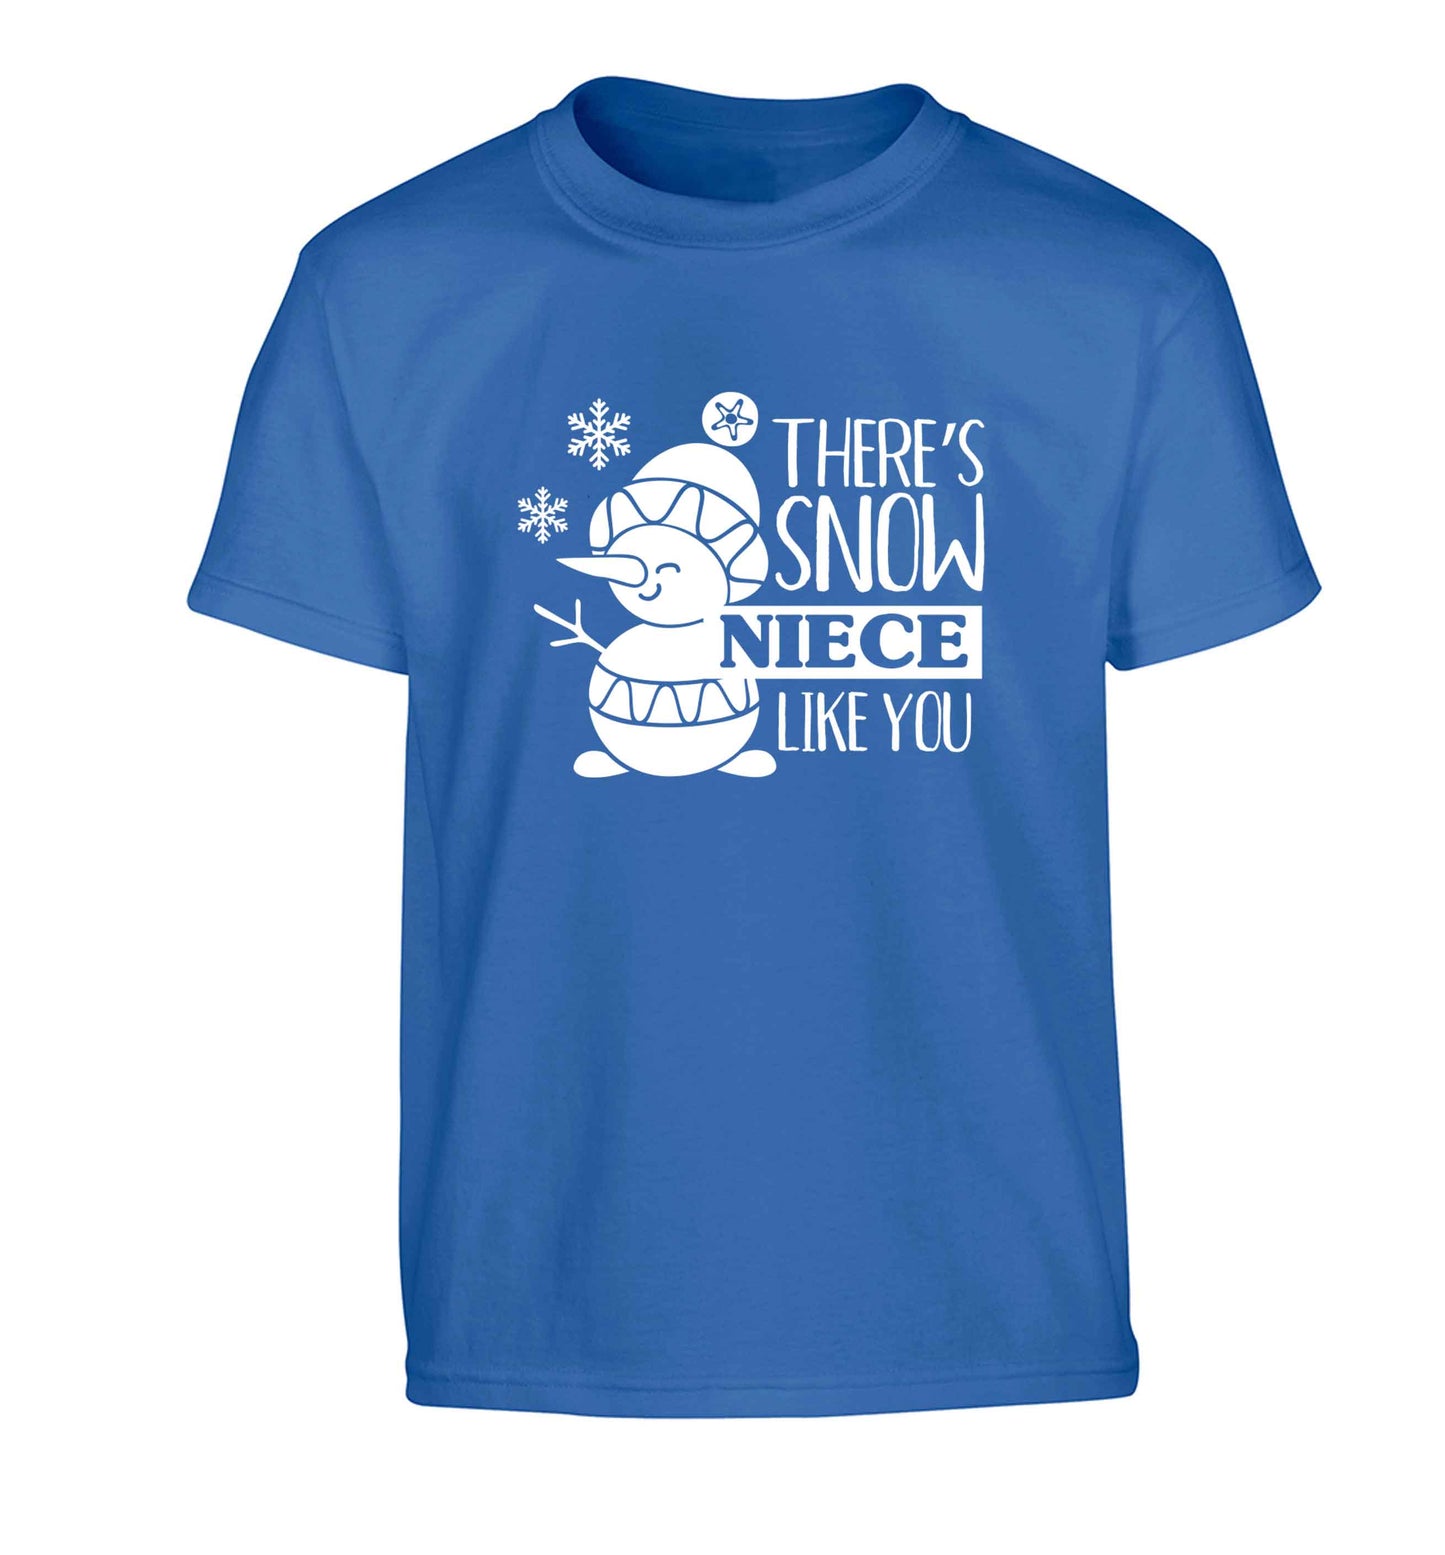 There's snow niece like you Children's blue Tshirt 12-13 Years